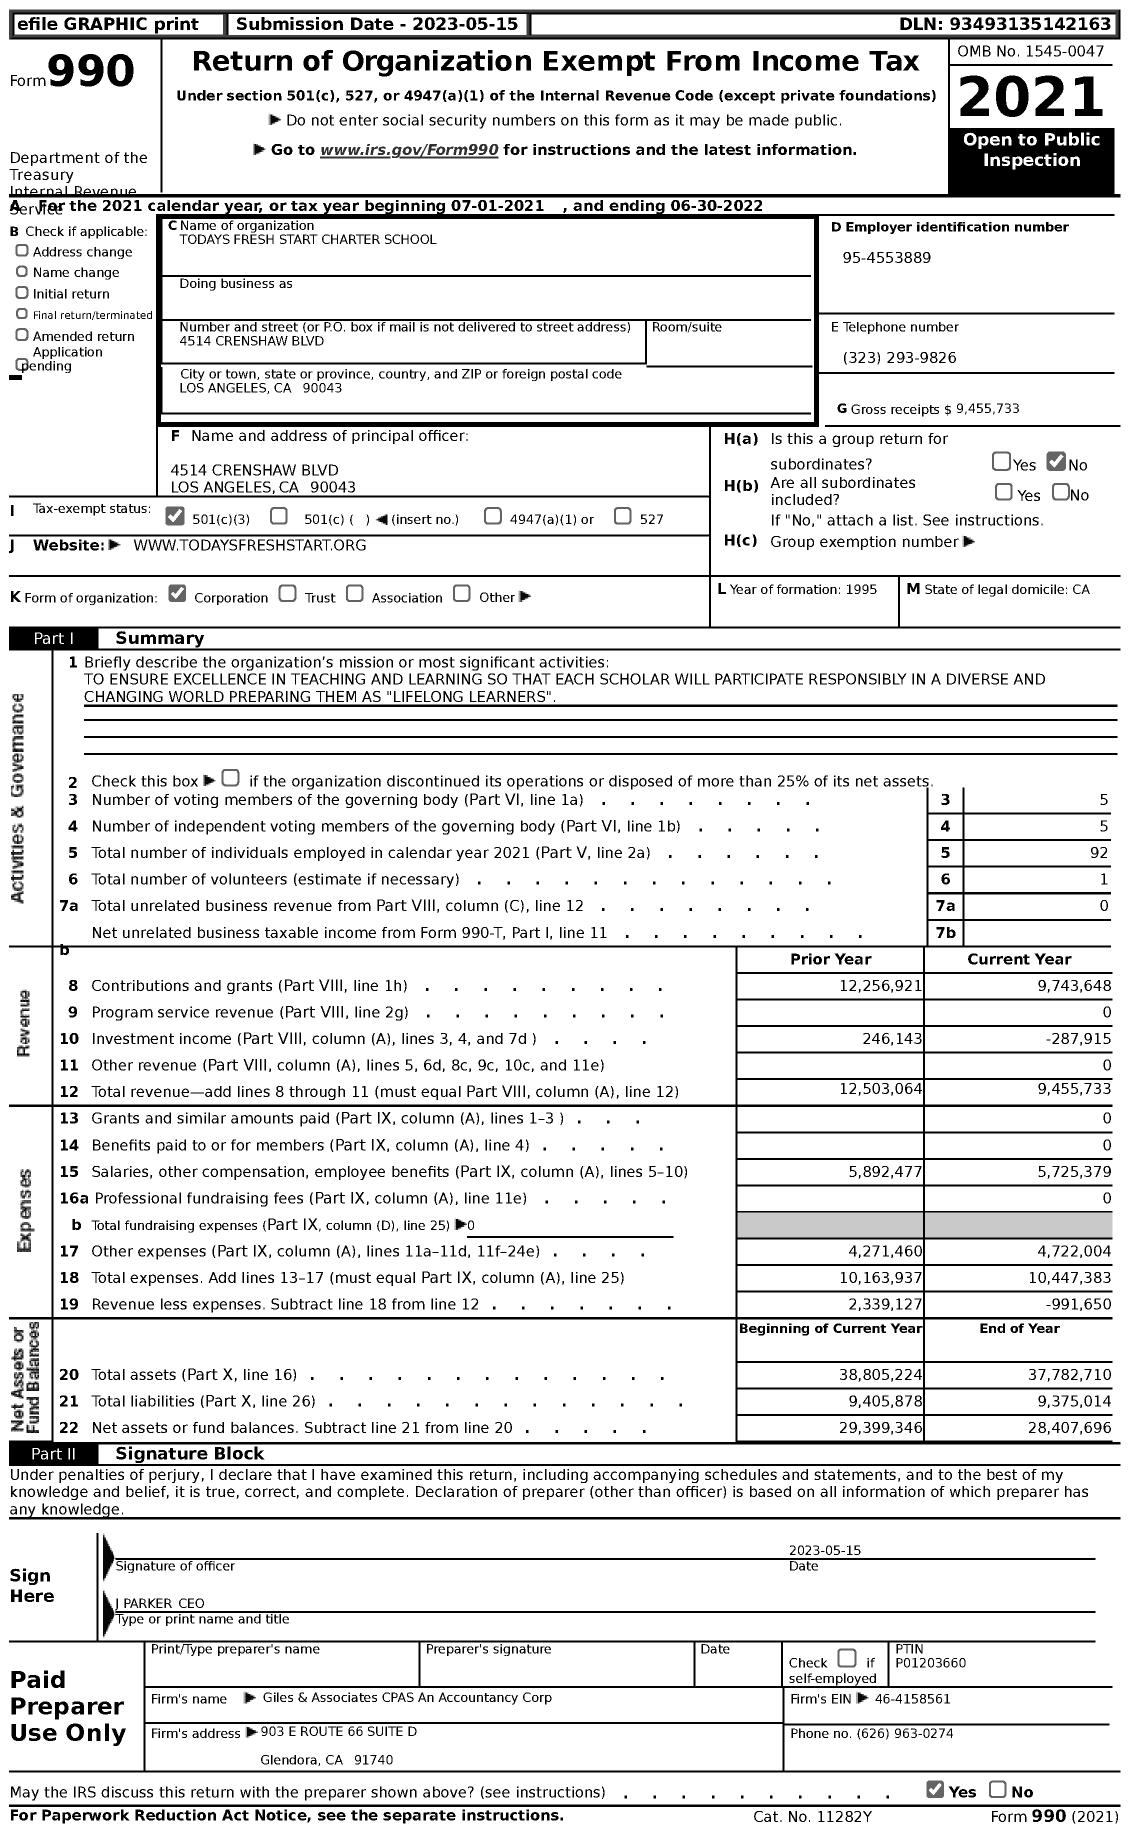 Image of first page of 2021 Form 990 for Today's Fresh Start Charter School (TFSCS)